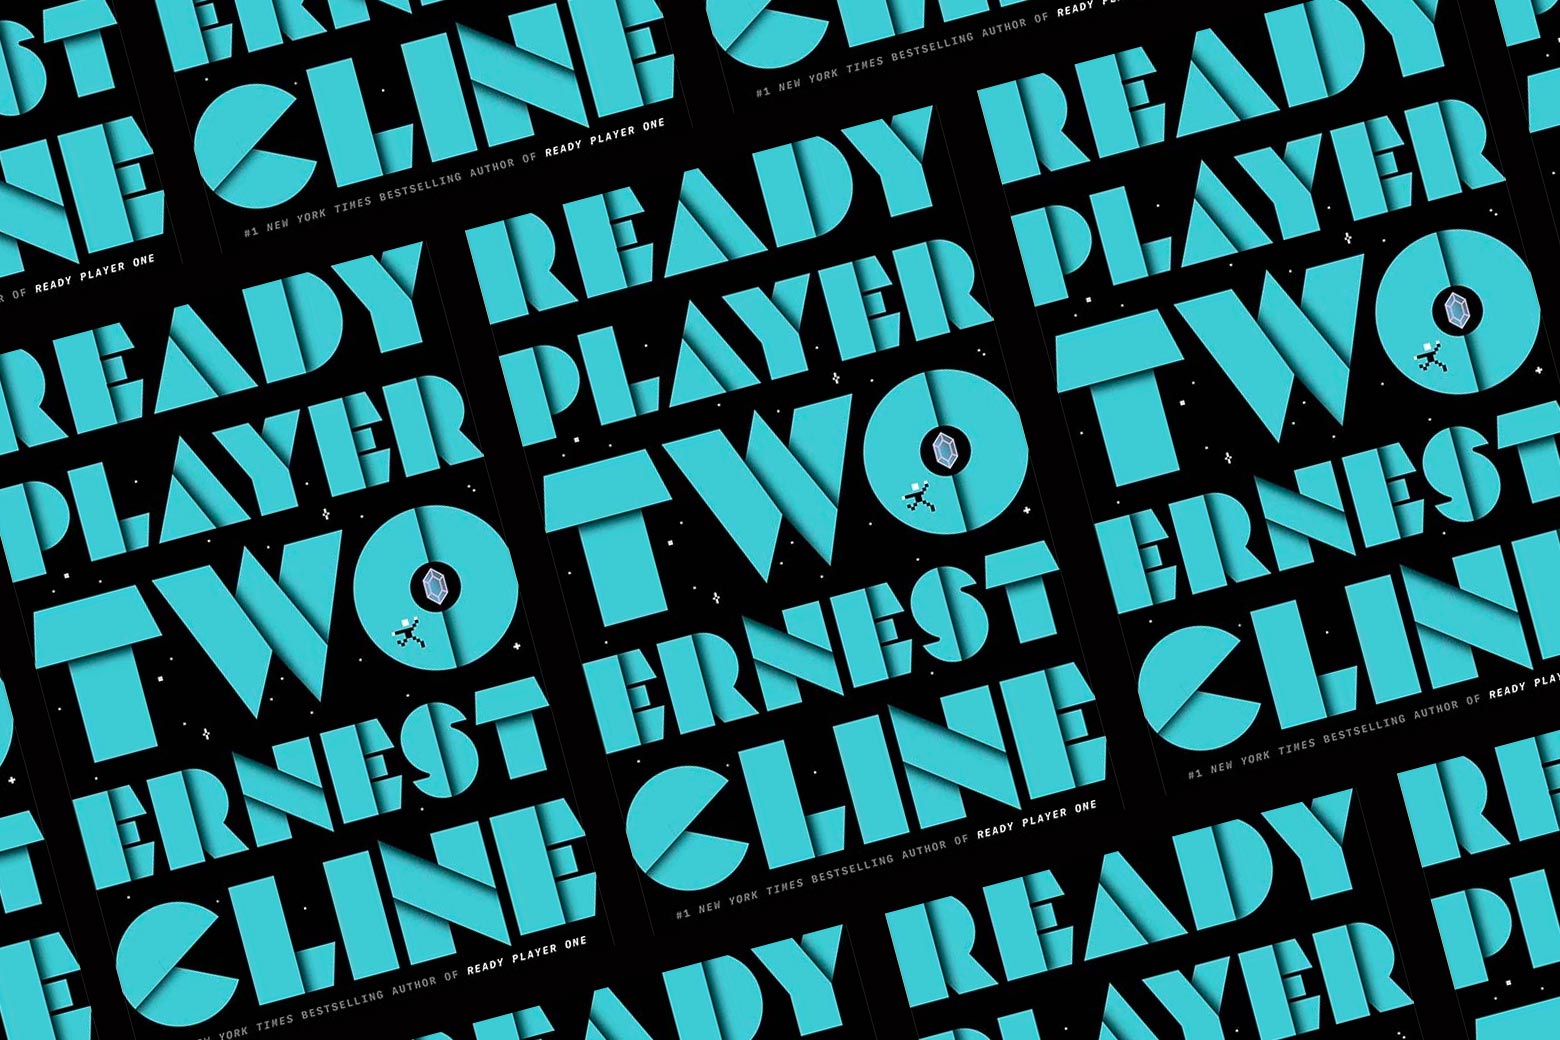 The cover of Ready Player Two, with bold blue lettering on a black background, in a repeating pattern.